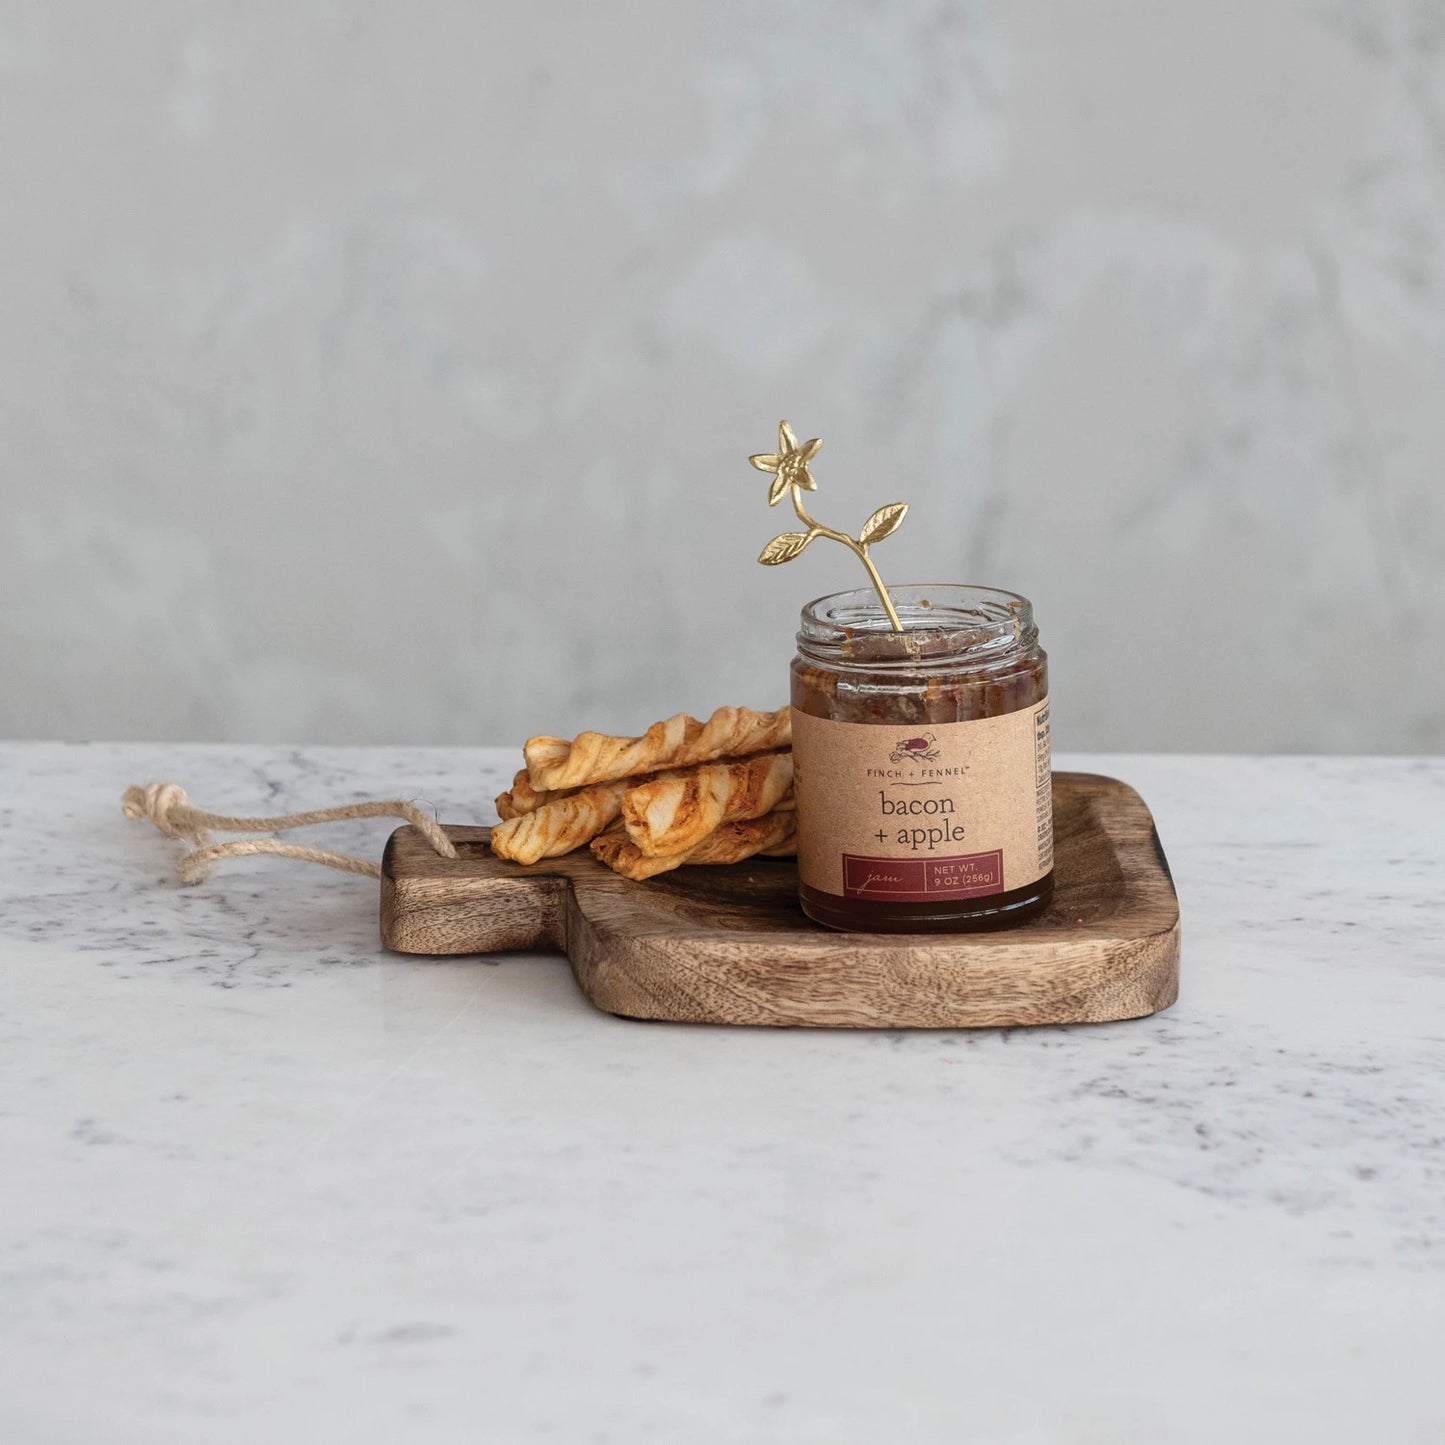 mango wood board on a marble counter with a jar of jam and bread sticks on it.